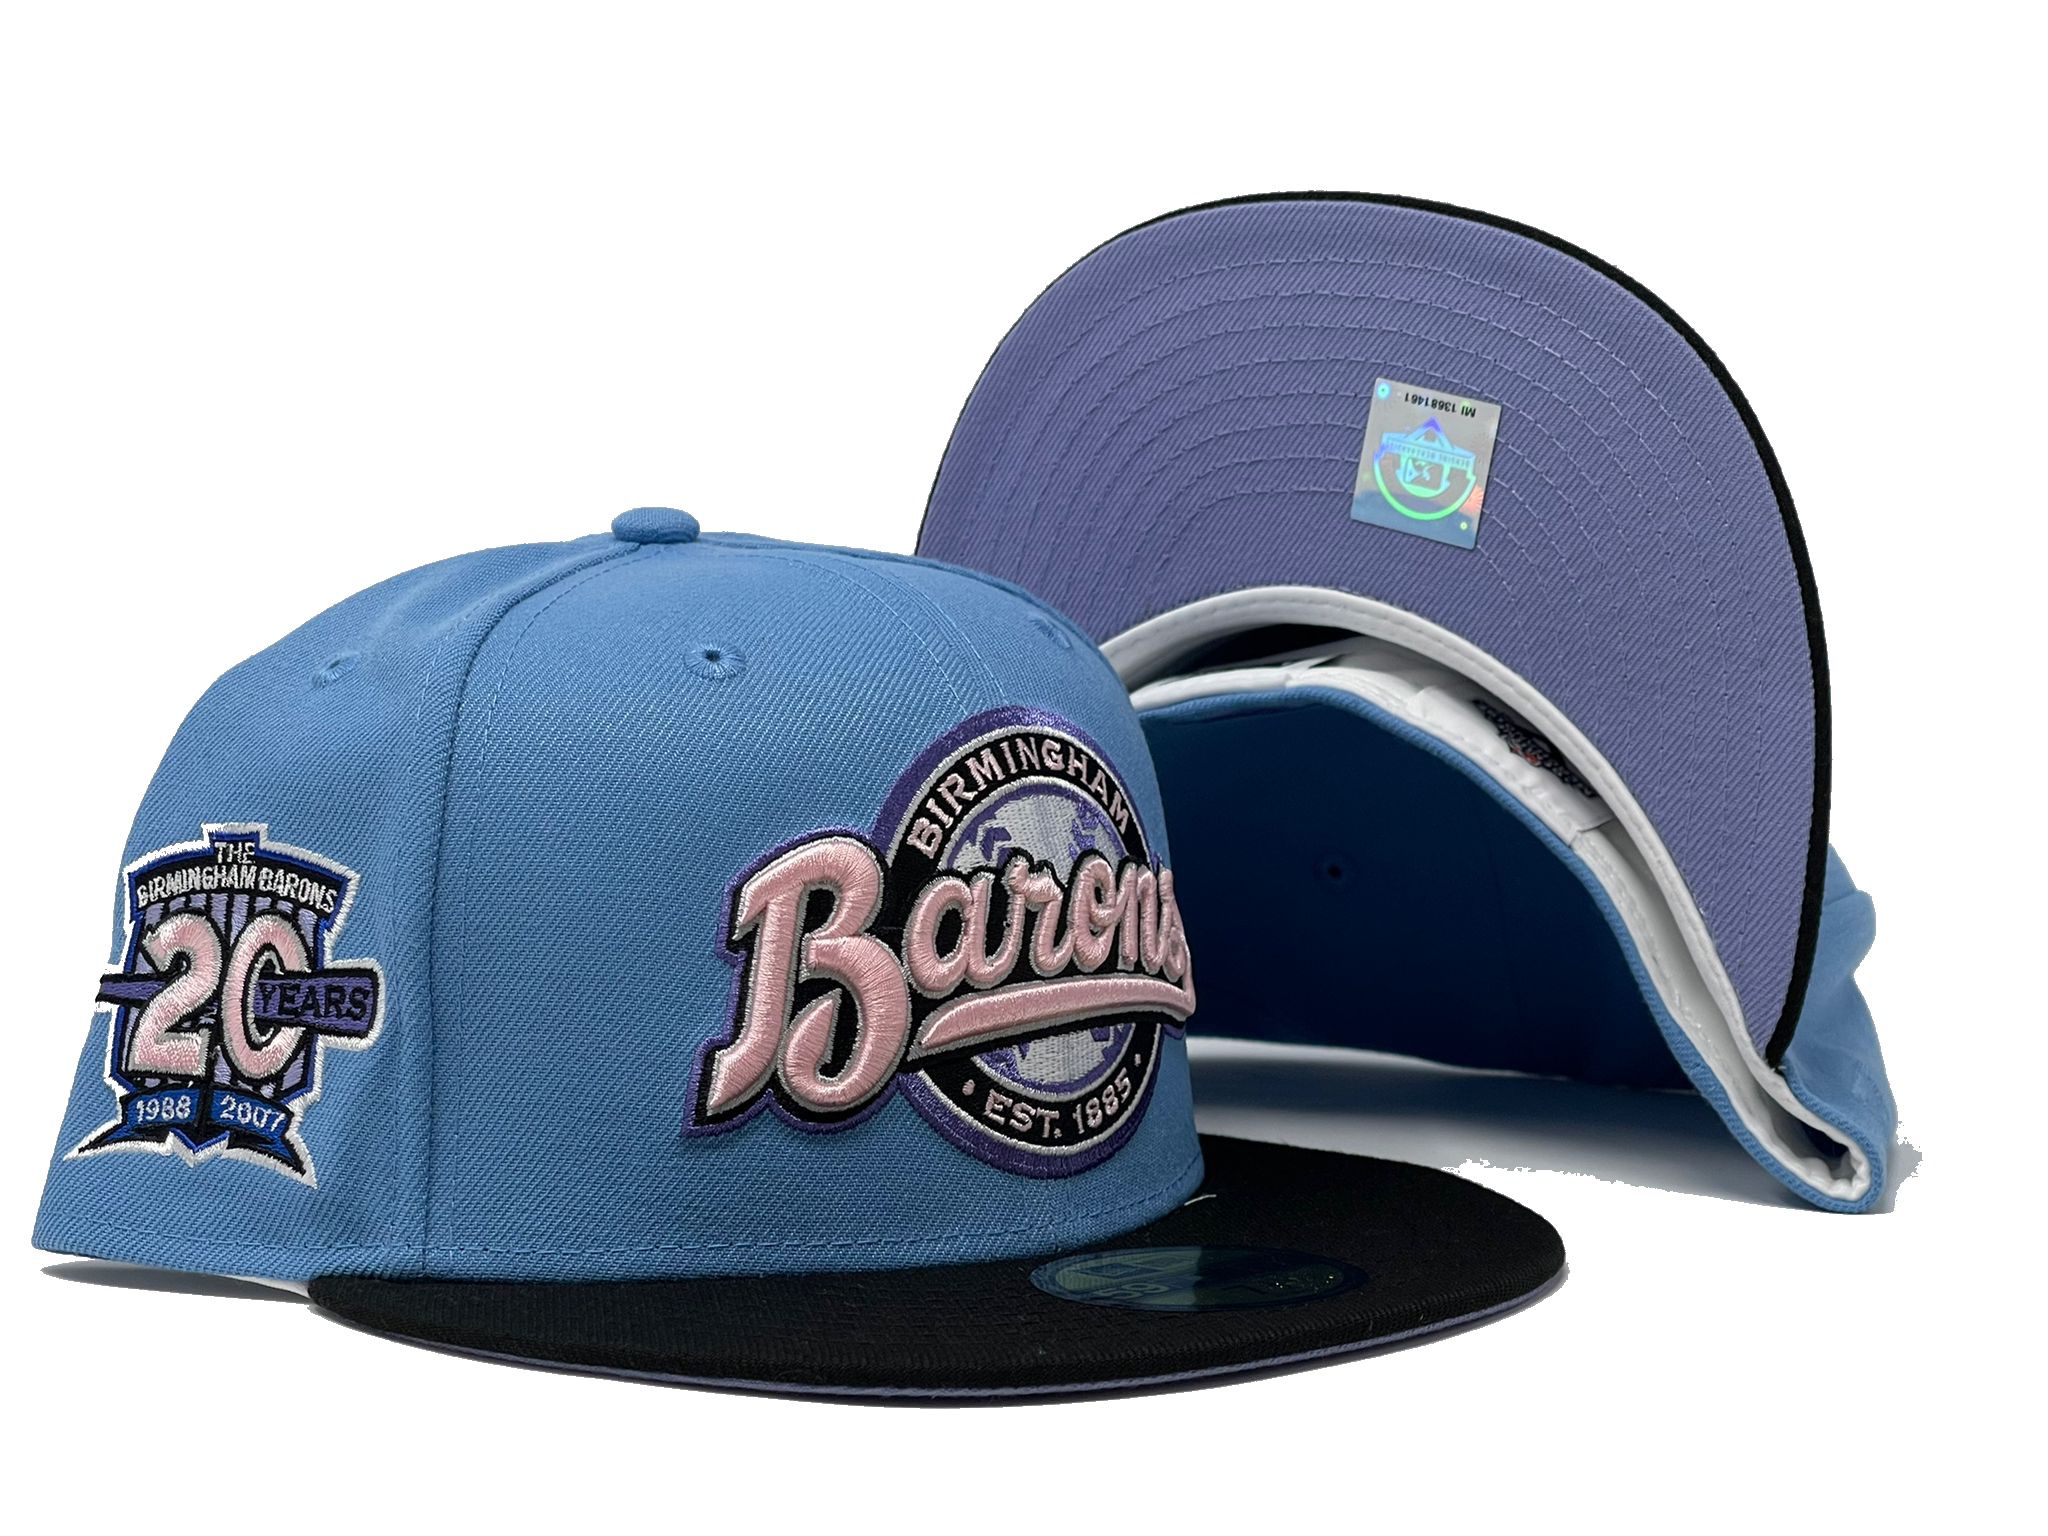 New Era Myfitteds Birmingham barons jet black 20th anniversary size 7 1/8  brand new - $183 (18% Off Retail) New With Tags - From A